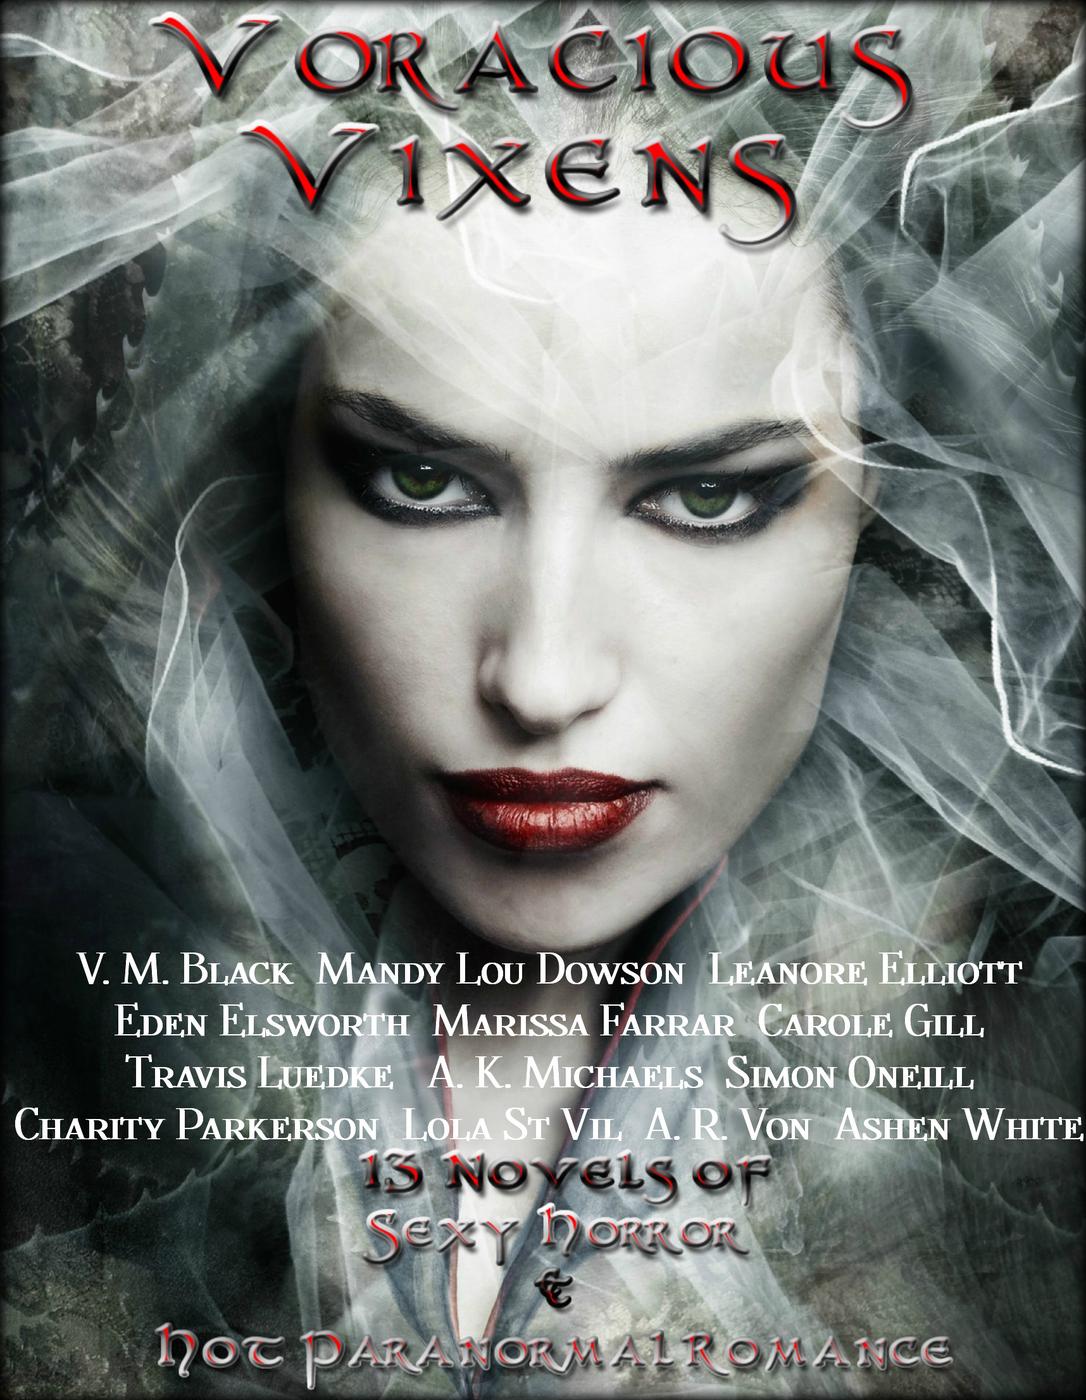 Voracious Vixens, 13 Novels of Sexy Horror and Hot Paranormal Romance